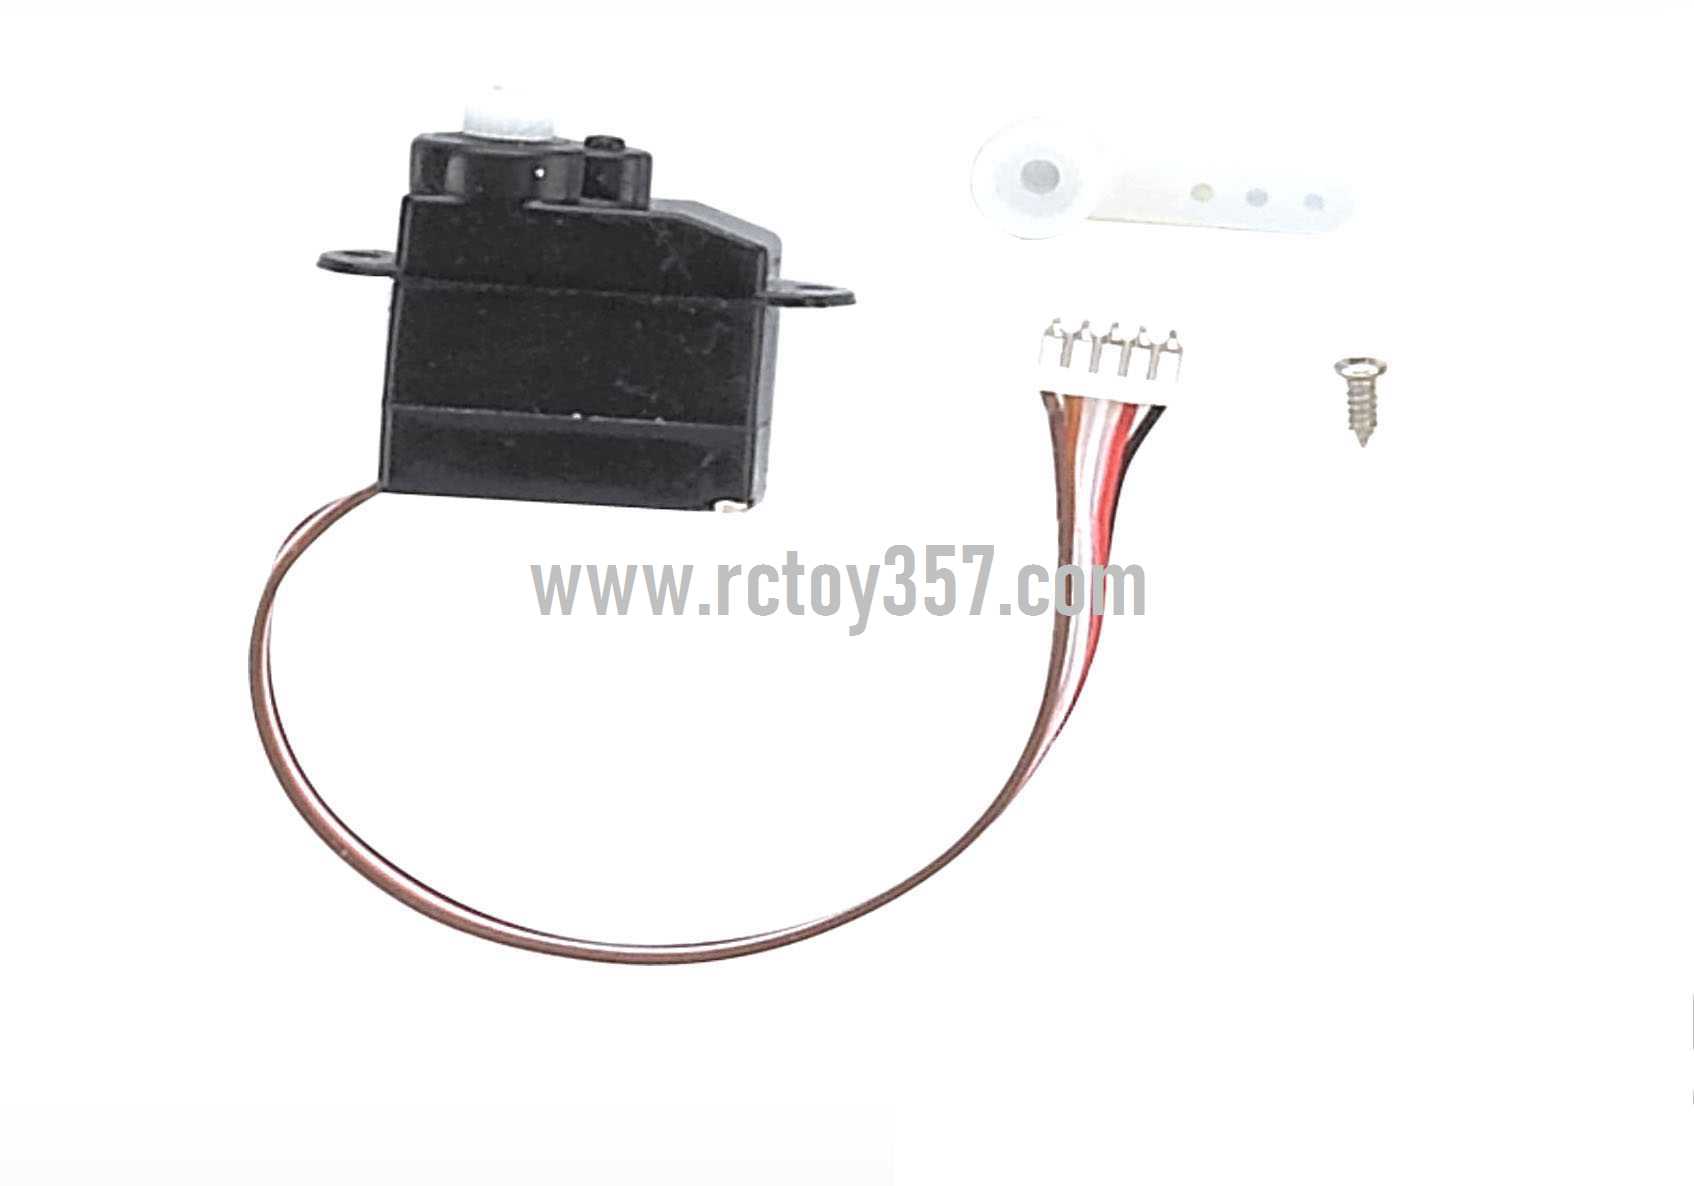 RCToy357.com - Shuang Ma/Double Hors 9103 toy Parts Servo